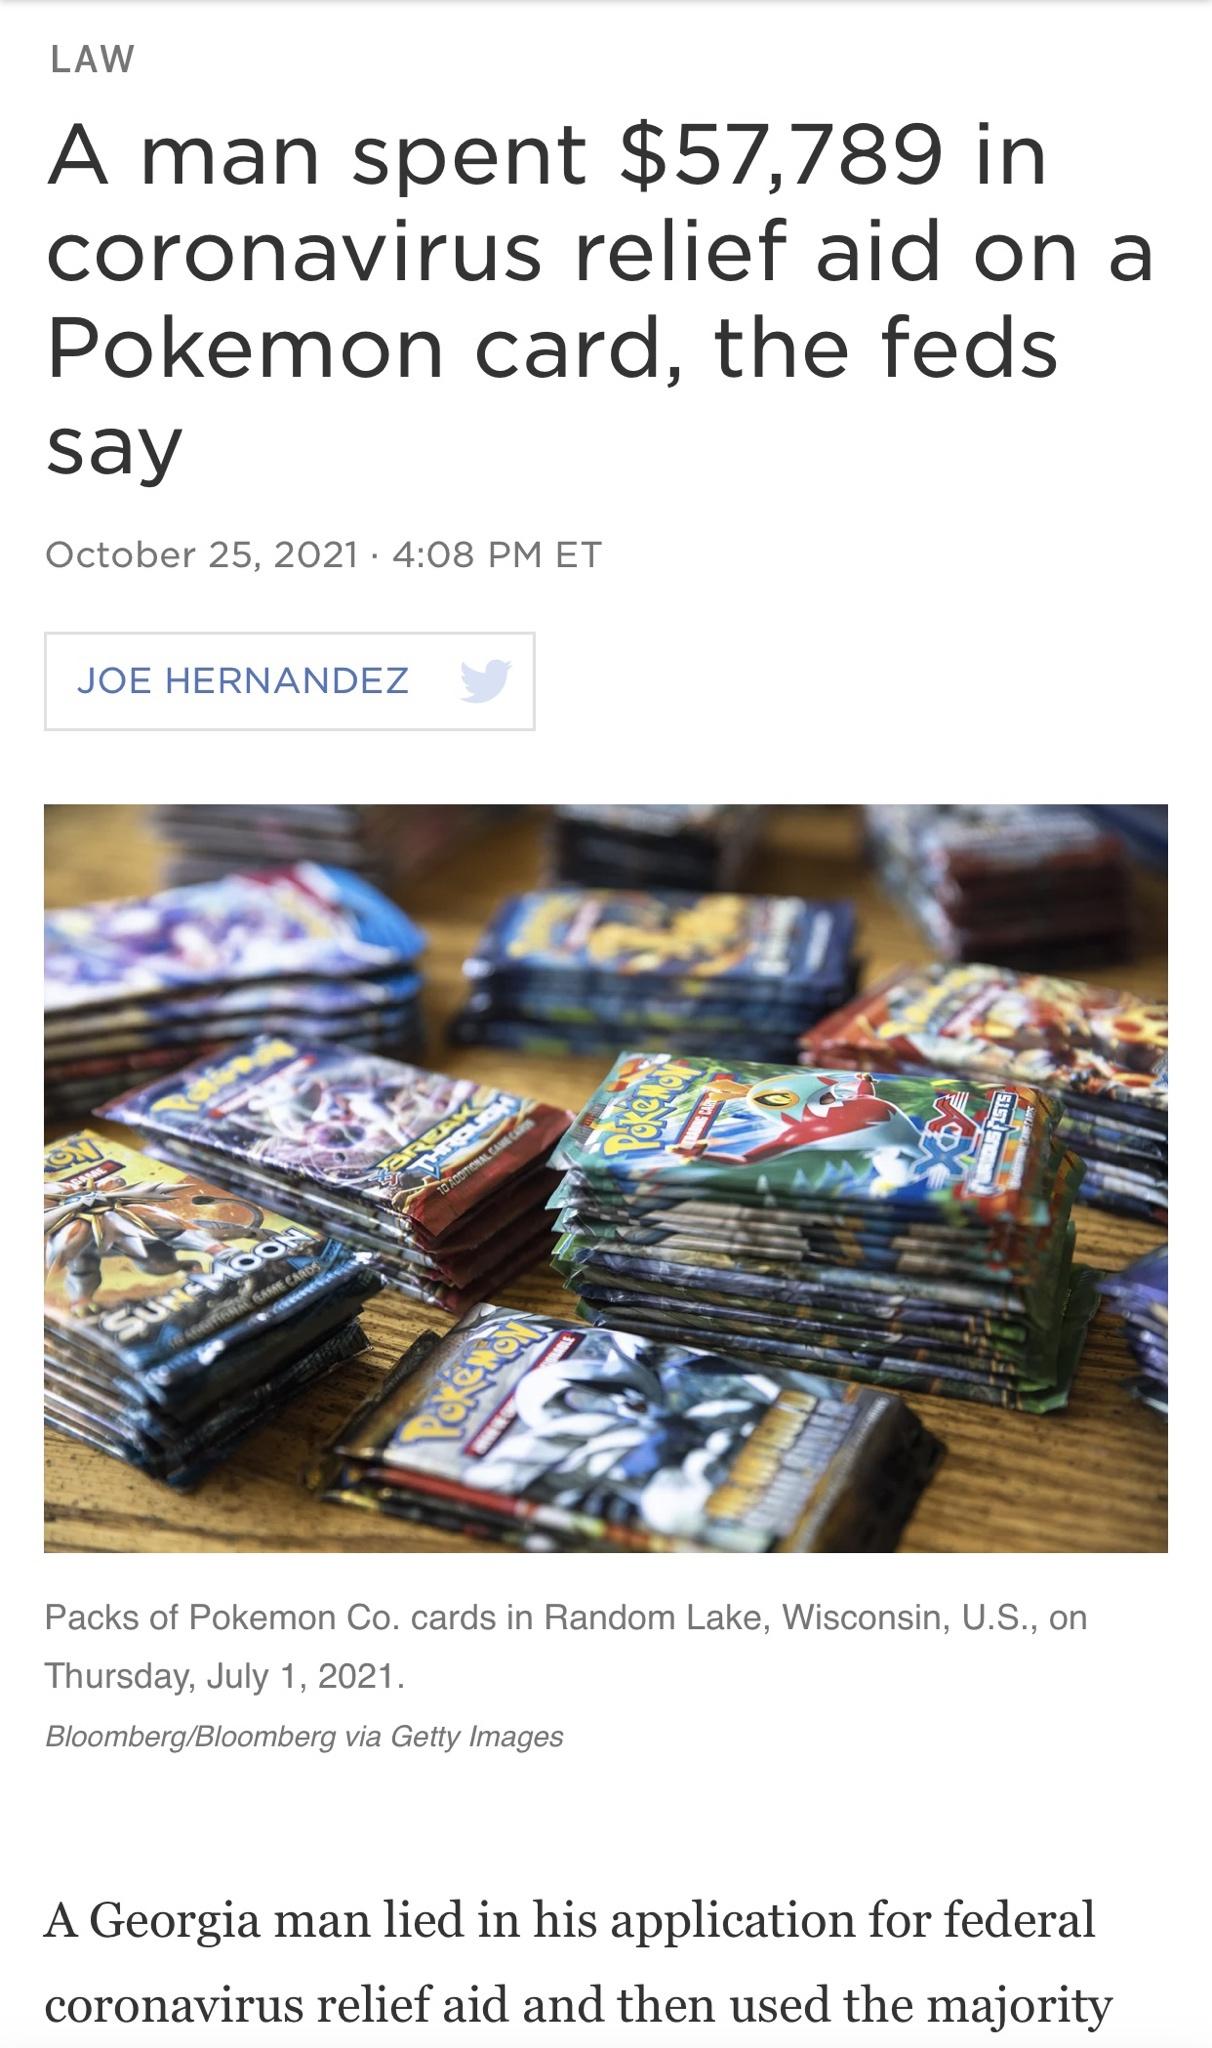 funny memes and random pics - Law A man spent $57,789 in coronavirus relief aid on a Pokemon card, the feds say Et Joe Hernandez Ser fo Rean 10 Additional Camera Sunkoon Bara Esse Card Packs of Pokemon Co. cards in Random Lake, Wisconsin, U.S., on Thursda